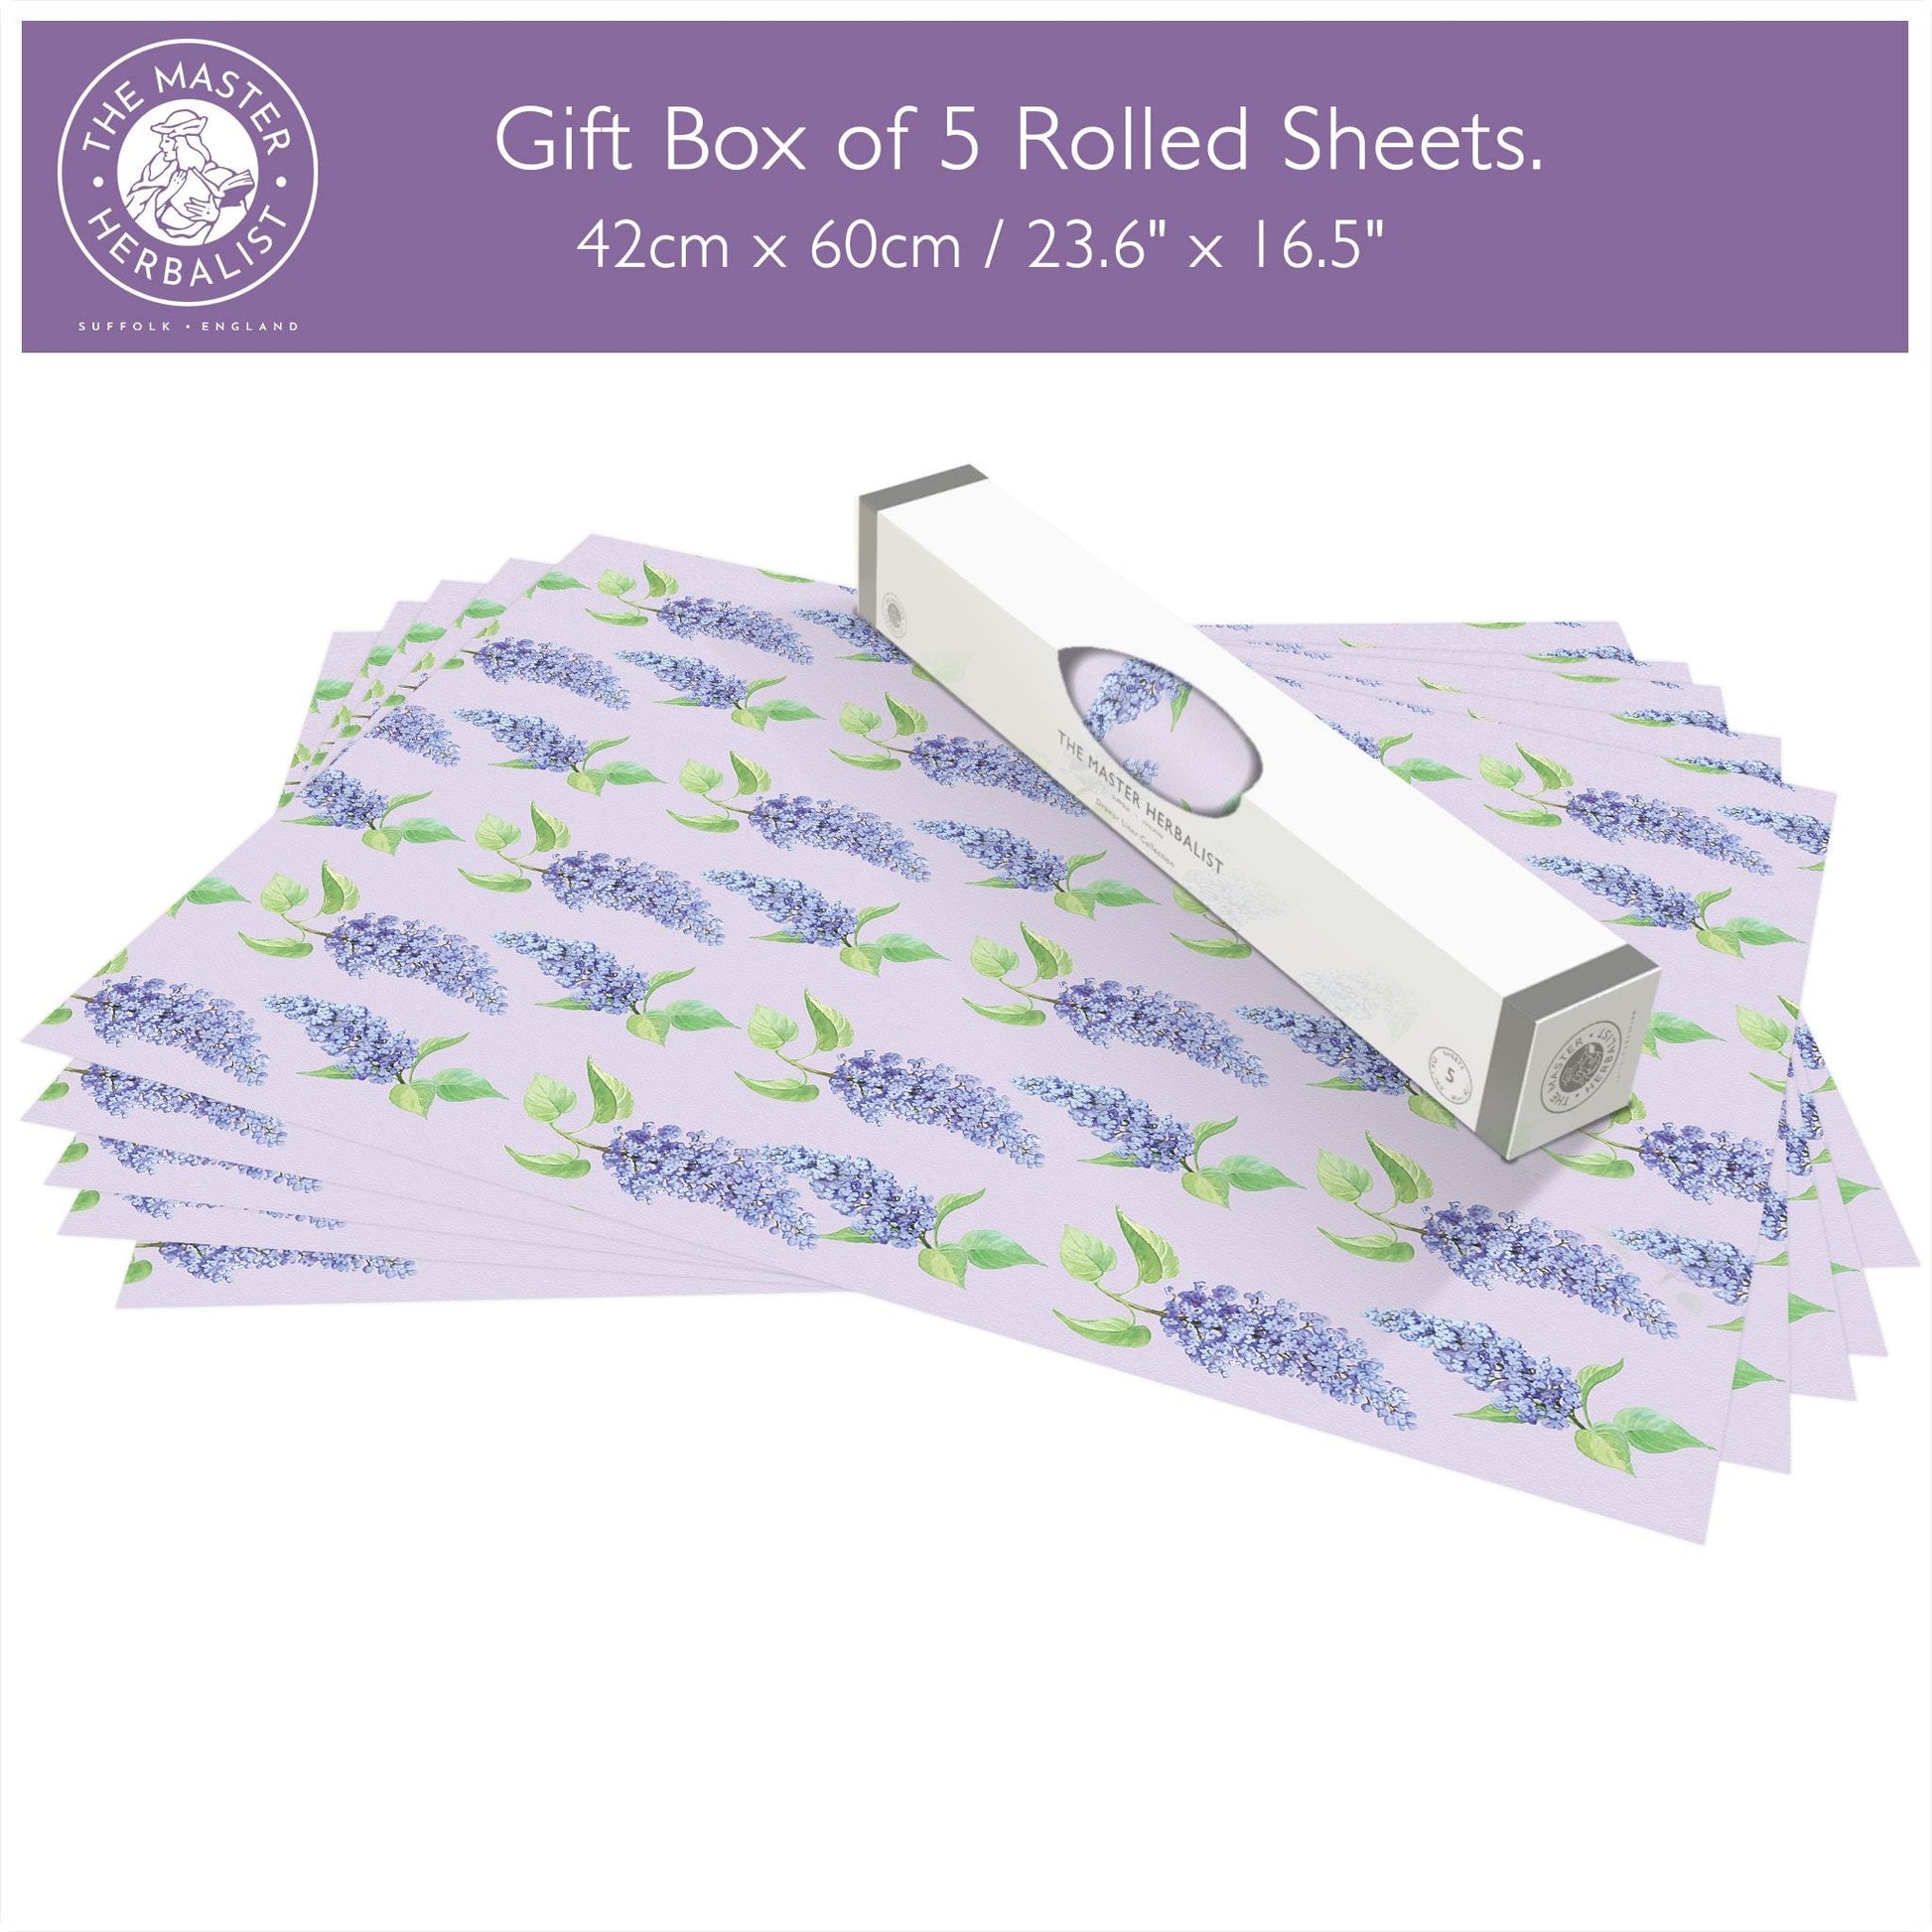 Simply Drawer Liners LILAC Fragrance SCENTED Drawer Liners in a floral LILAC Design. Made in Britain.